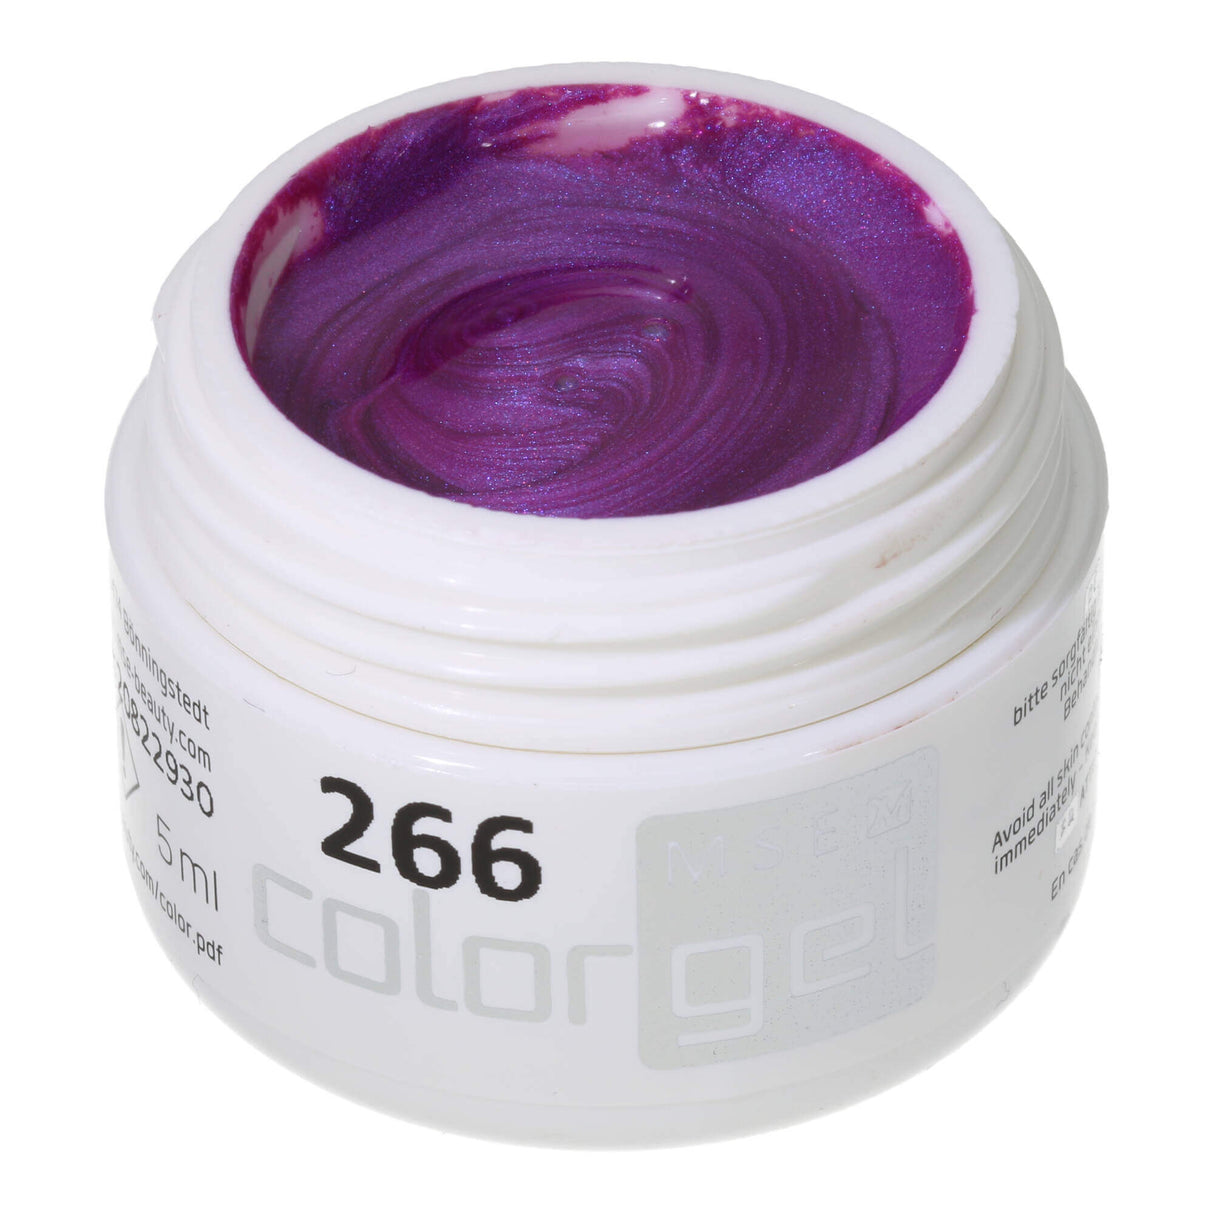 # 266 Premium EFFECT Color Gel 5ml red-violet with a subtle pearlescent sheen